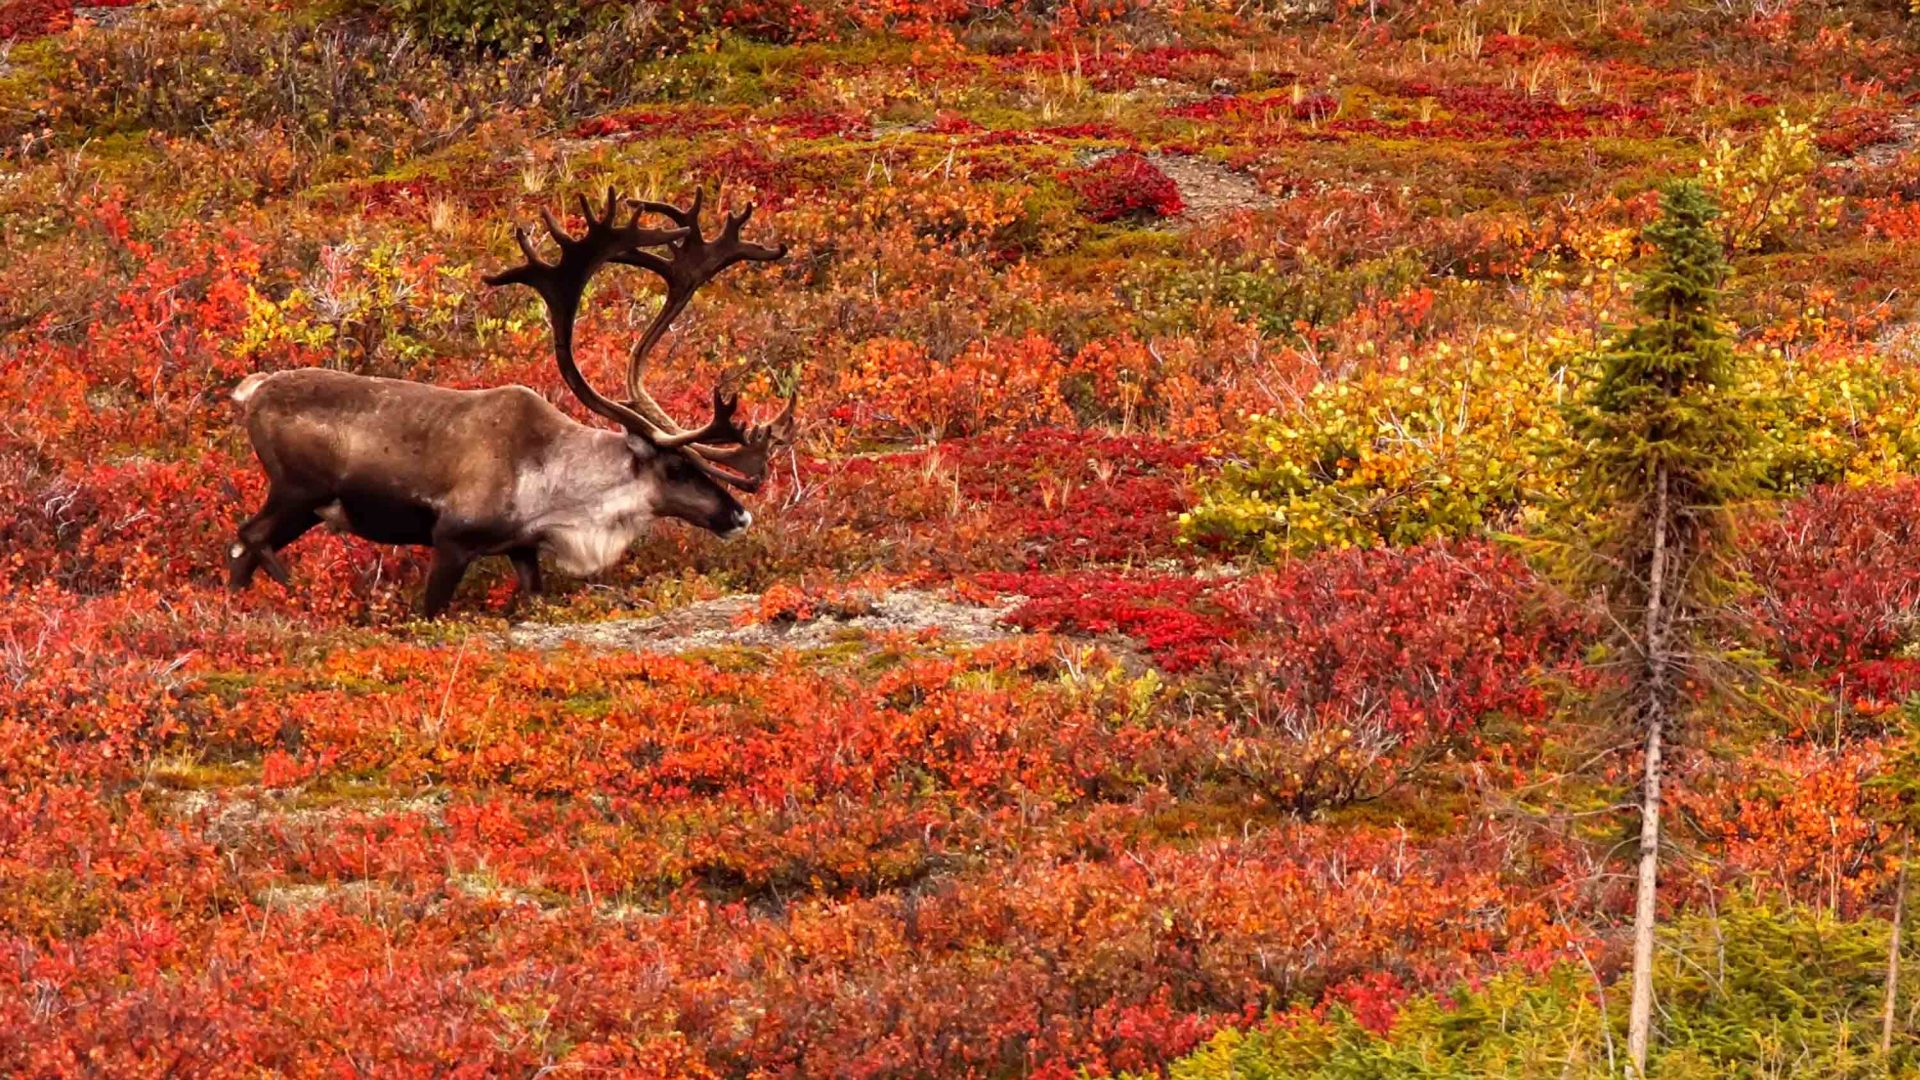 A caribou crosses Dempster Highway during autumn in the Yukon.